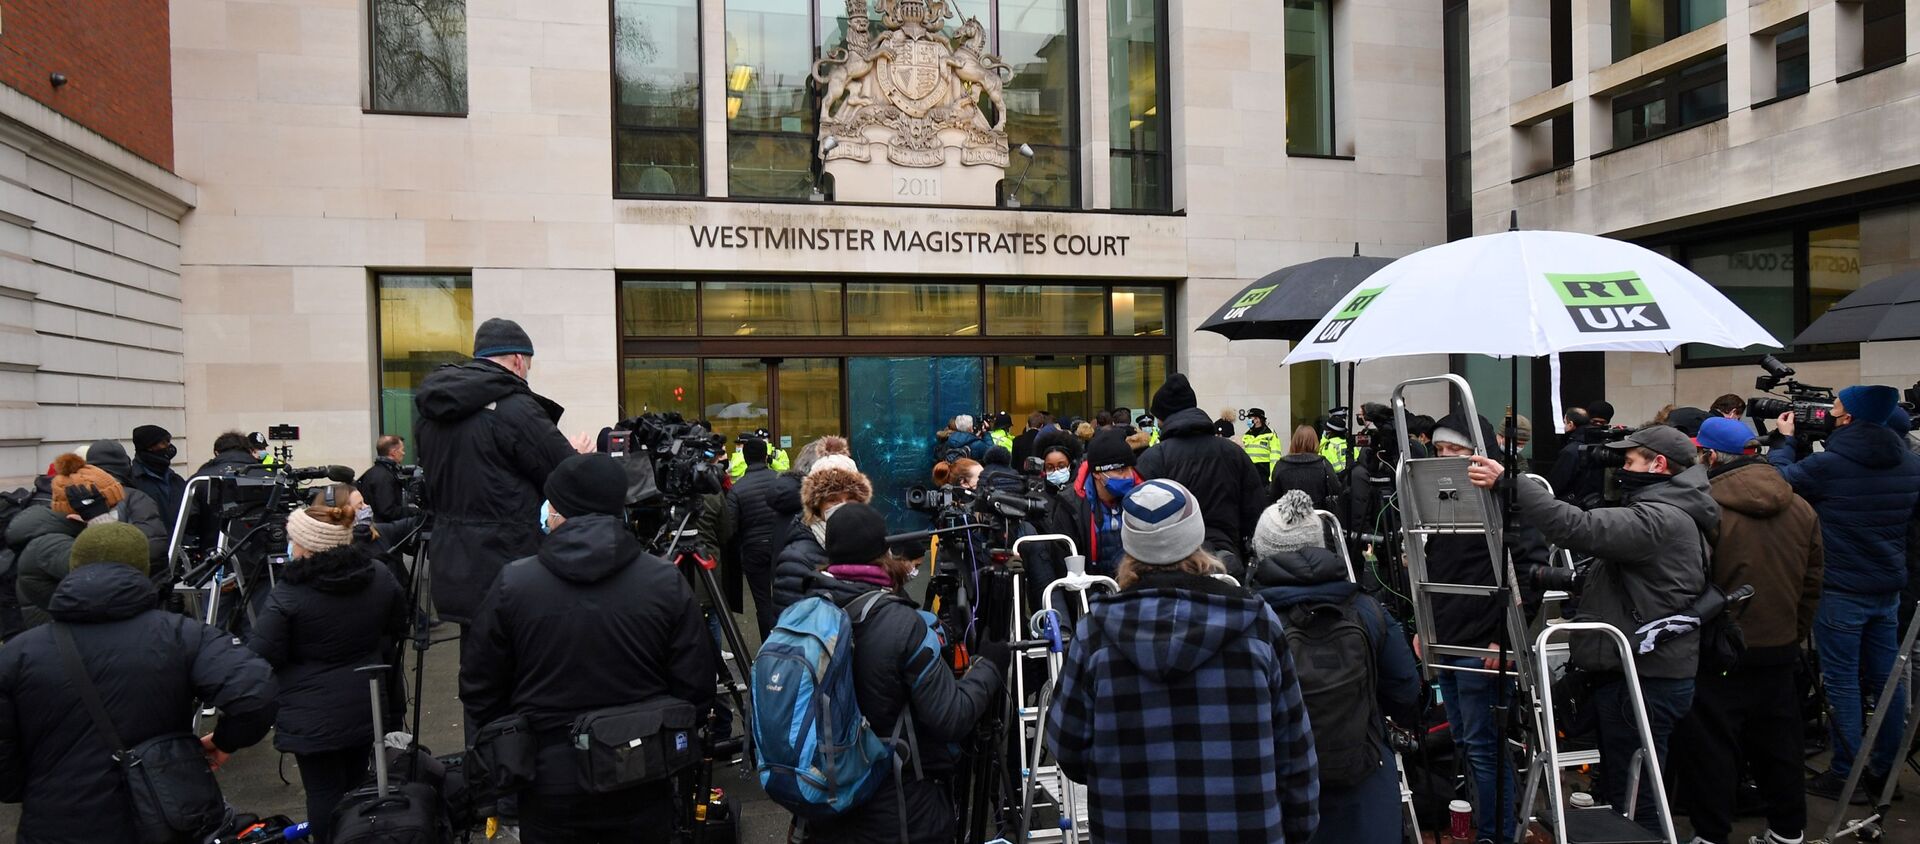 Members of the media and supporters of Wikileaks founder Julian Assange, gather outside Westminster Magistrates court in London for the bail hearing of Assange on January 6, 2021. - Sputnik International, 1920, 06.01.2021